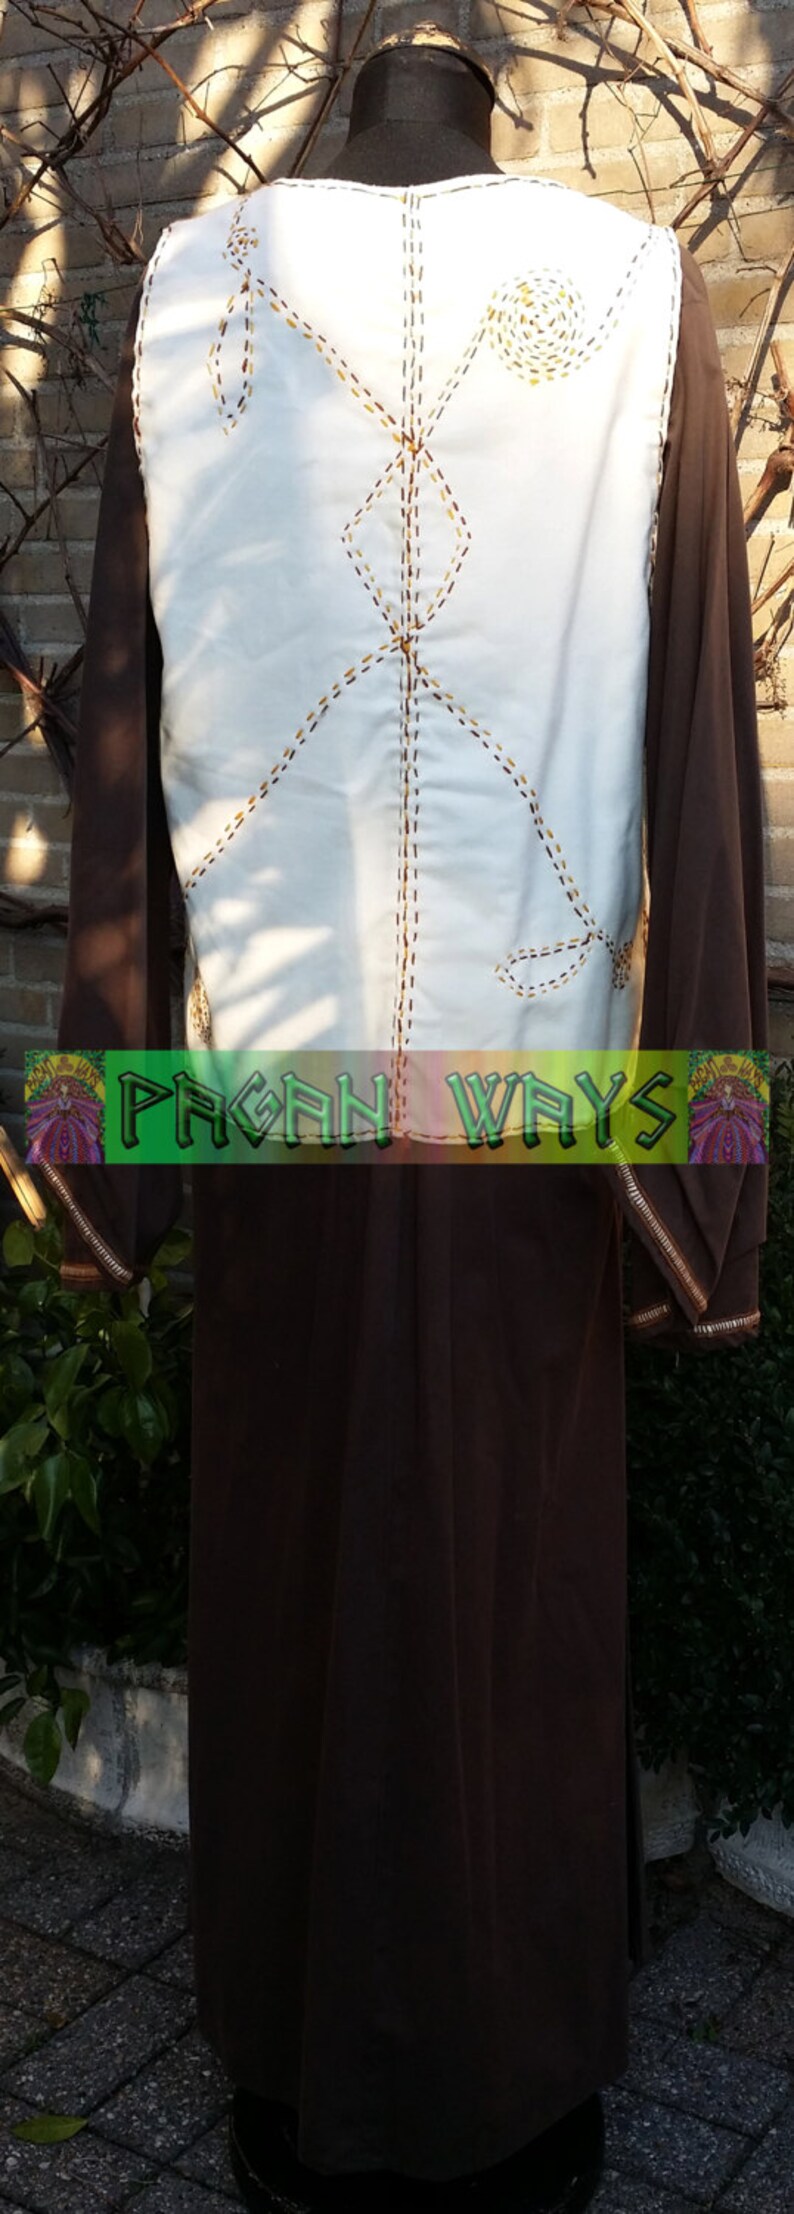 Complete outfit unique white music inspired jacket with embroidered clef and spirals and brown dress pagan bohemian hippie folk fantasy image 3